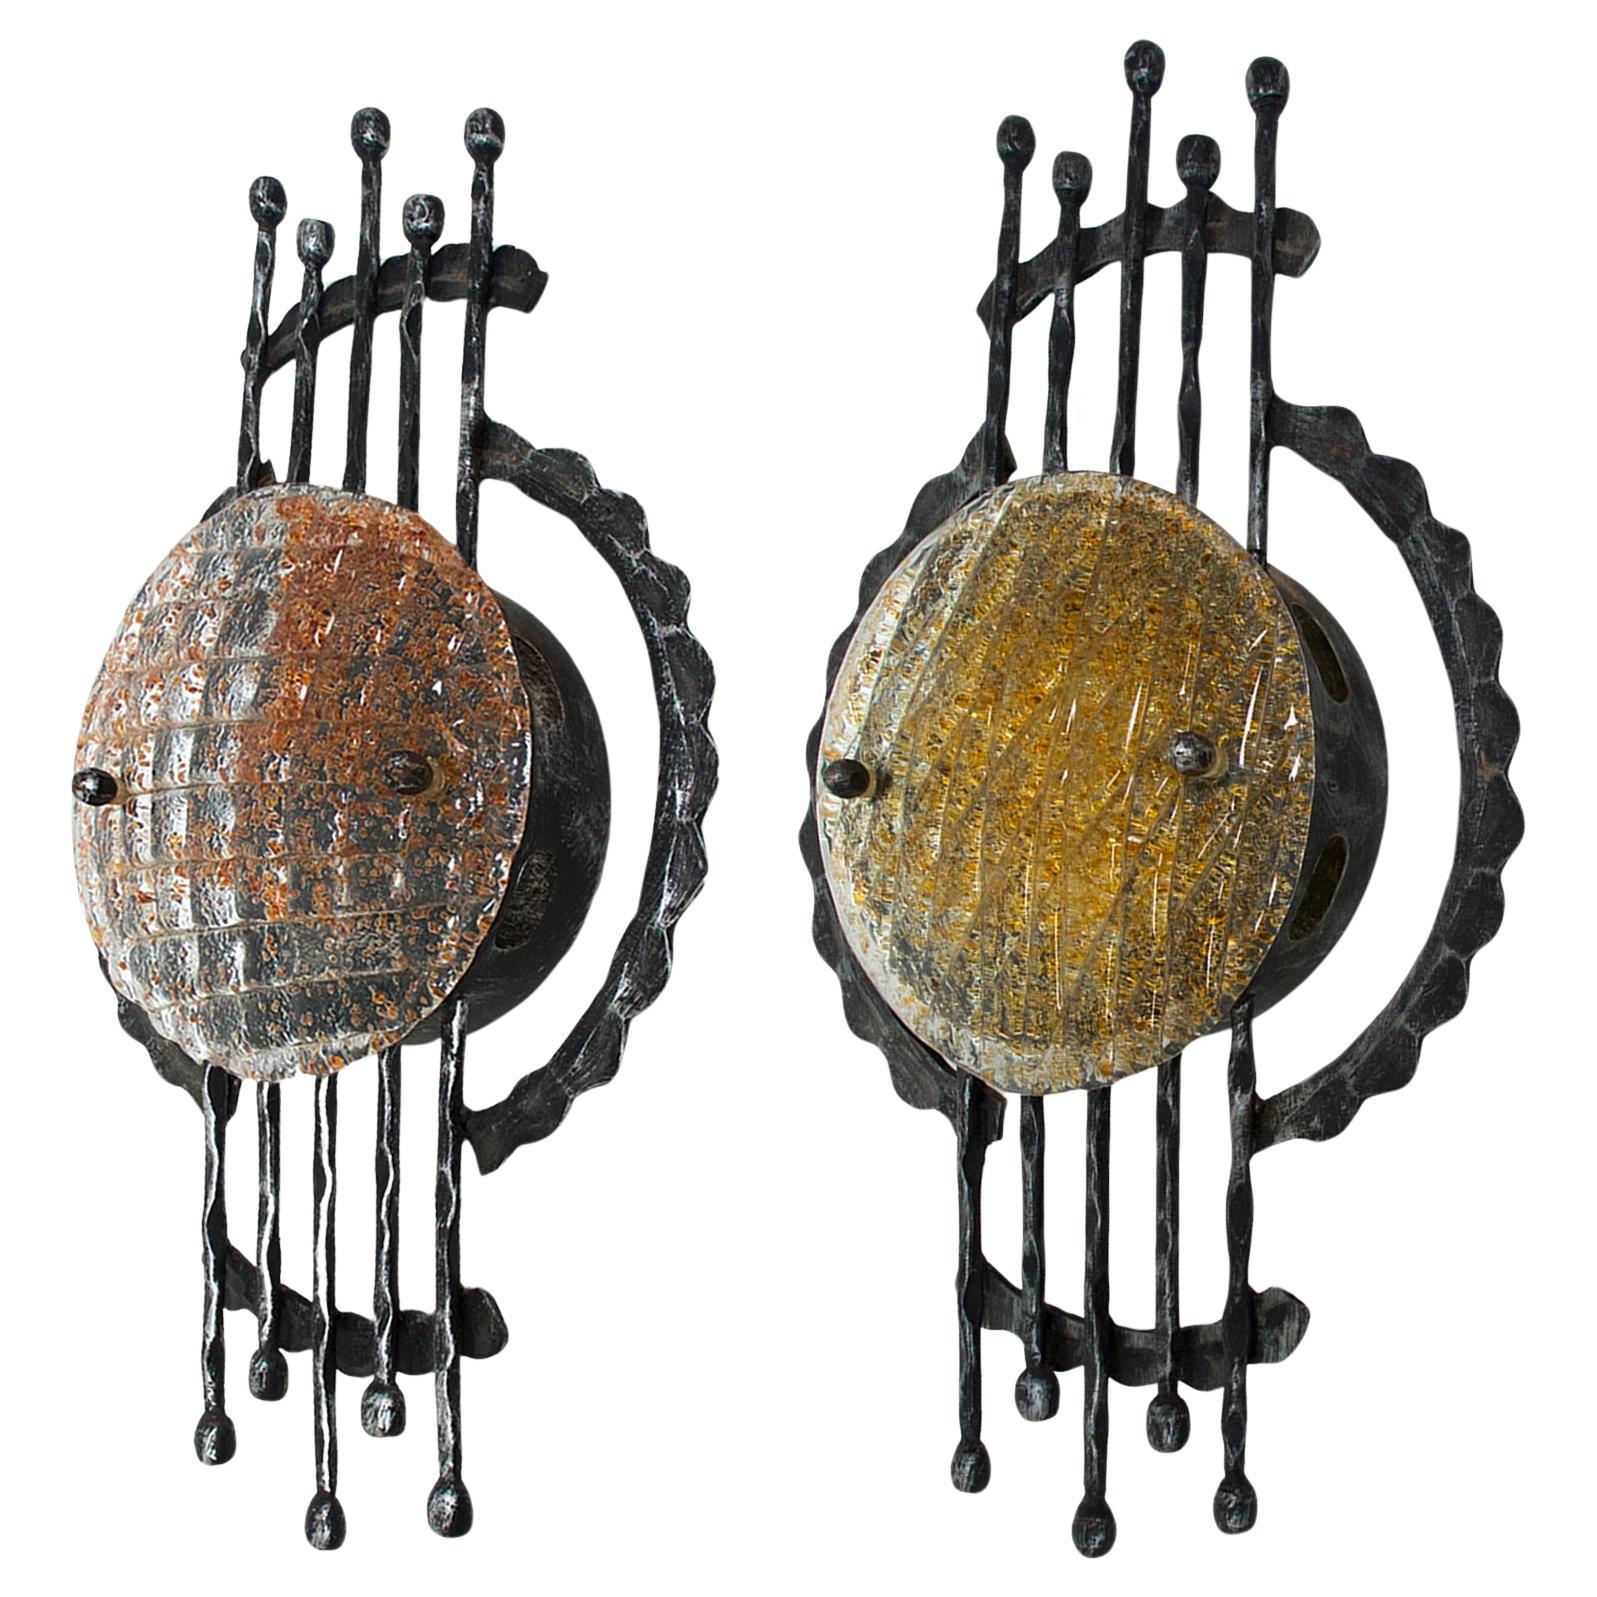 Beautiful set of two brutalist mid century wall sconces designed by Tom Ahlström & Hans Ehrich. 
Nice Brutalist shape with wrought iron and thick Murano glass (one glass with amber tones, the other one with yellow tones). 1 E27 socket per lamp. 
The